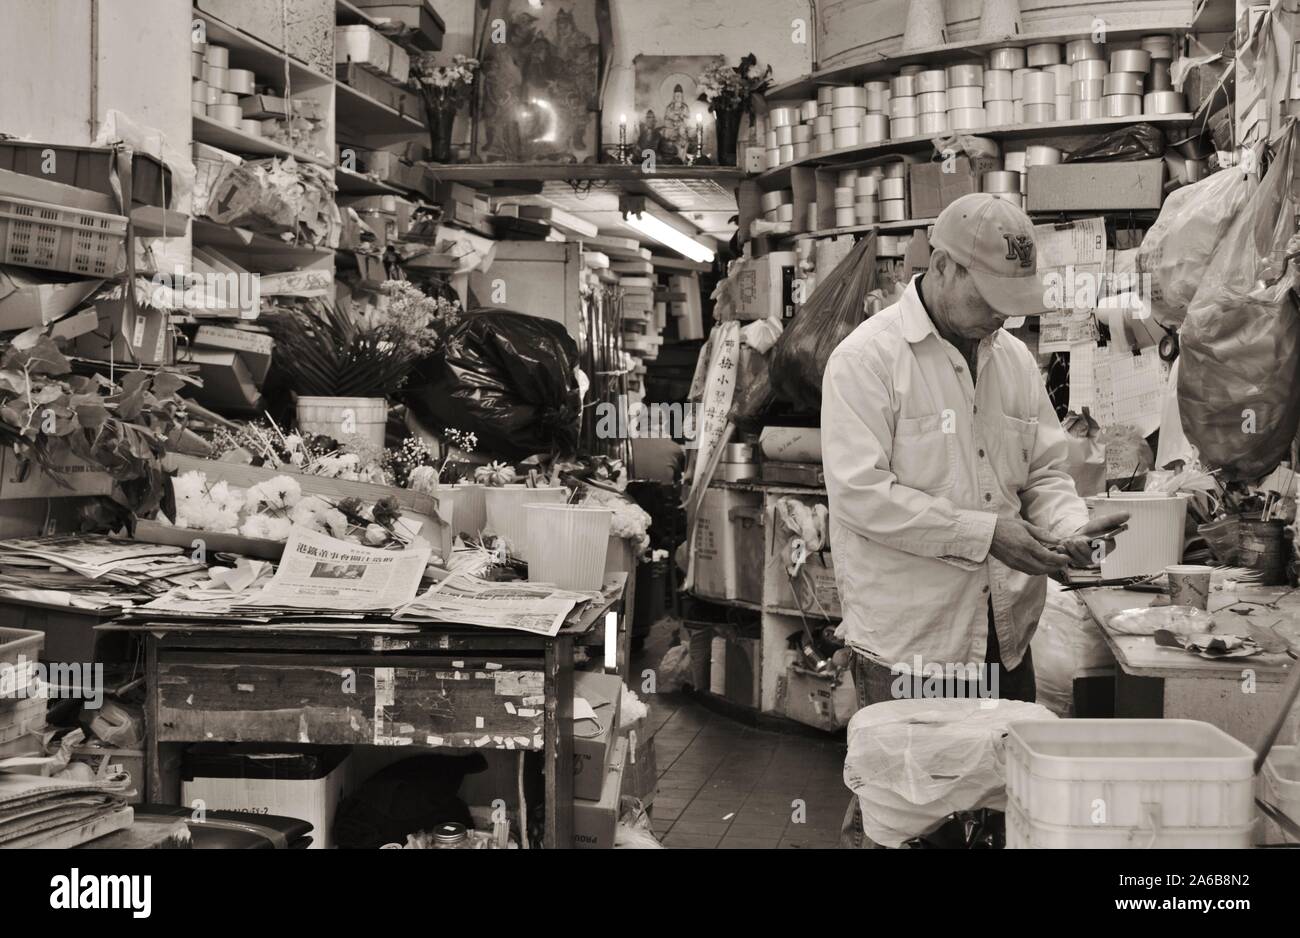 New York City Chinatown Small Family Owned Business Flower Shop Authentic Lifestyle Chinese Real Life Stock Photo